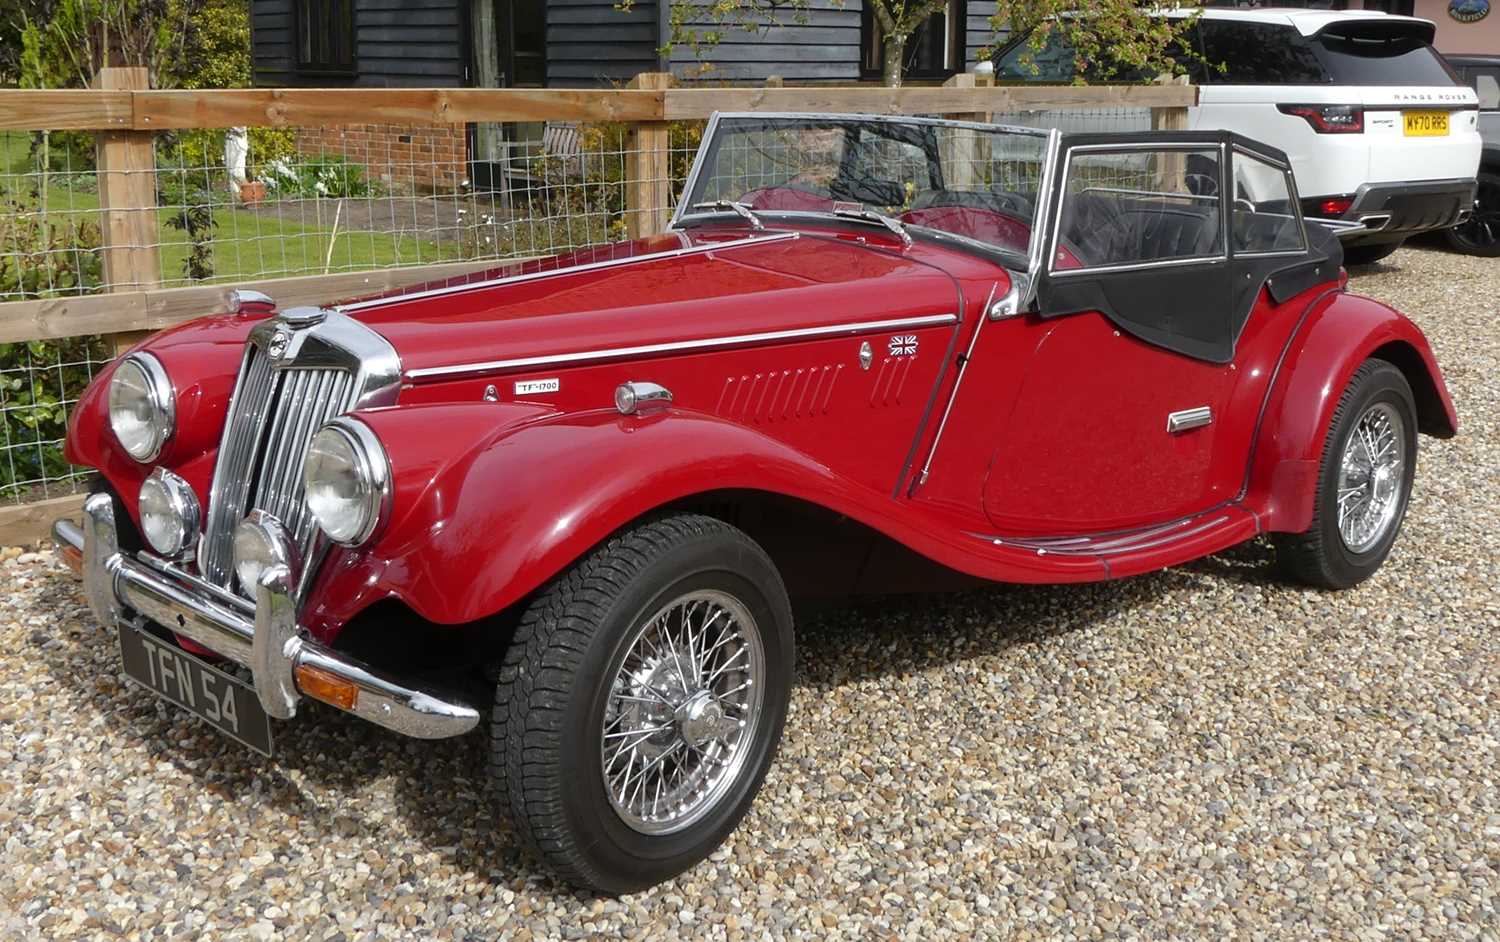 A 1986 Naylor TF 1700 2-Seater Sports car with steel roadster bodywork which is a faithful replica